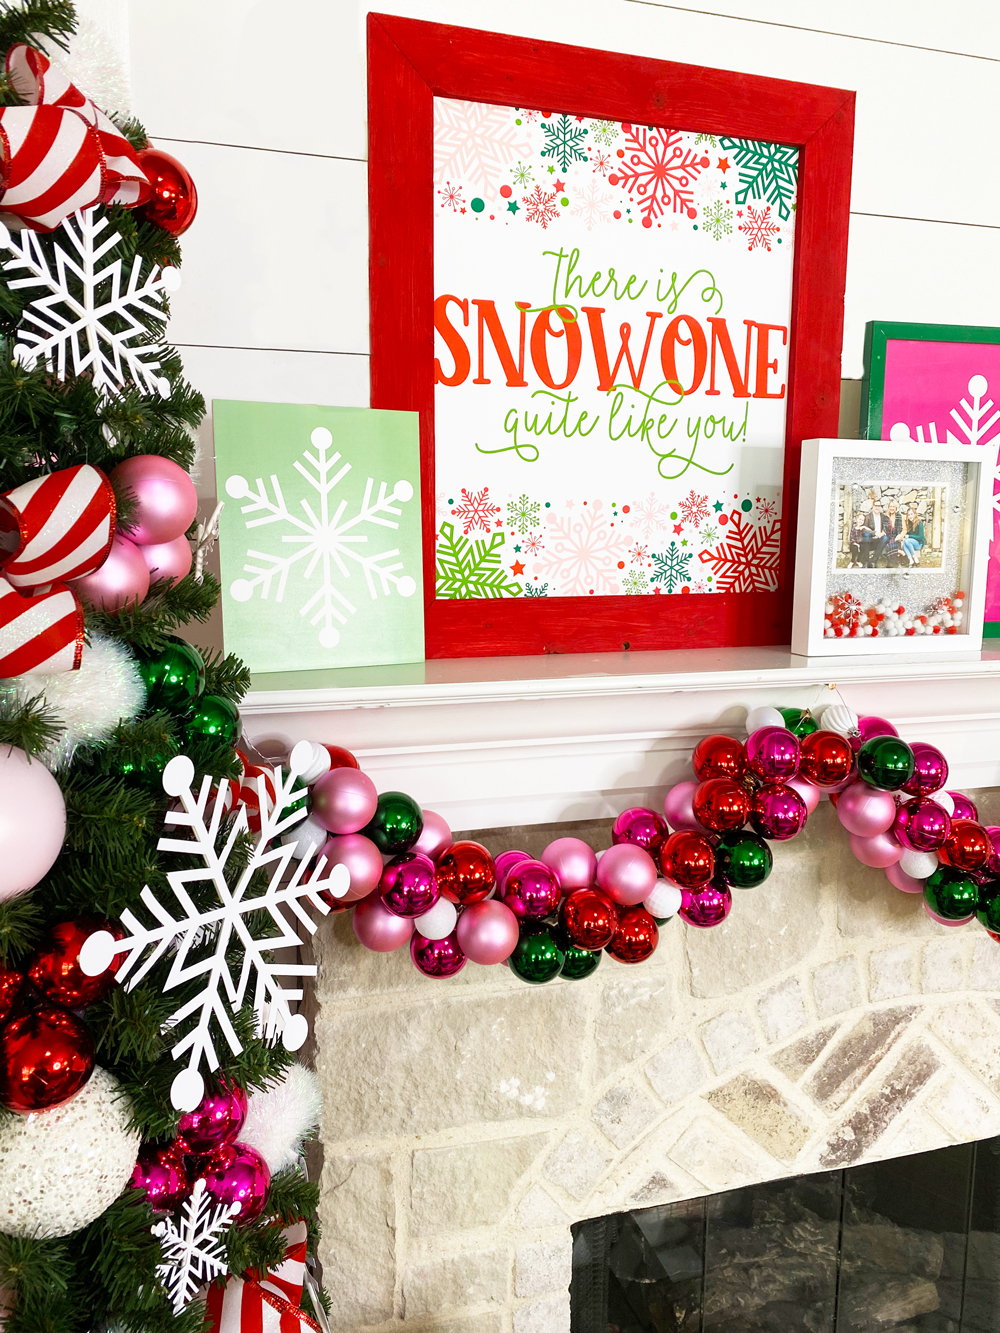 How To Make Snowflake Signs & Posters by Lindi Haws of Love The Day